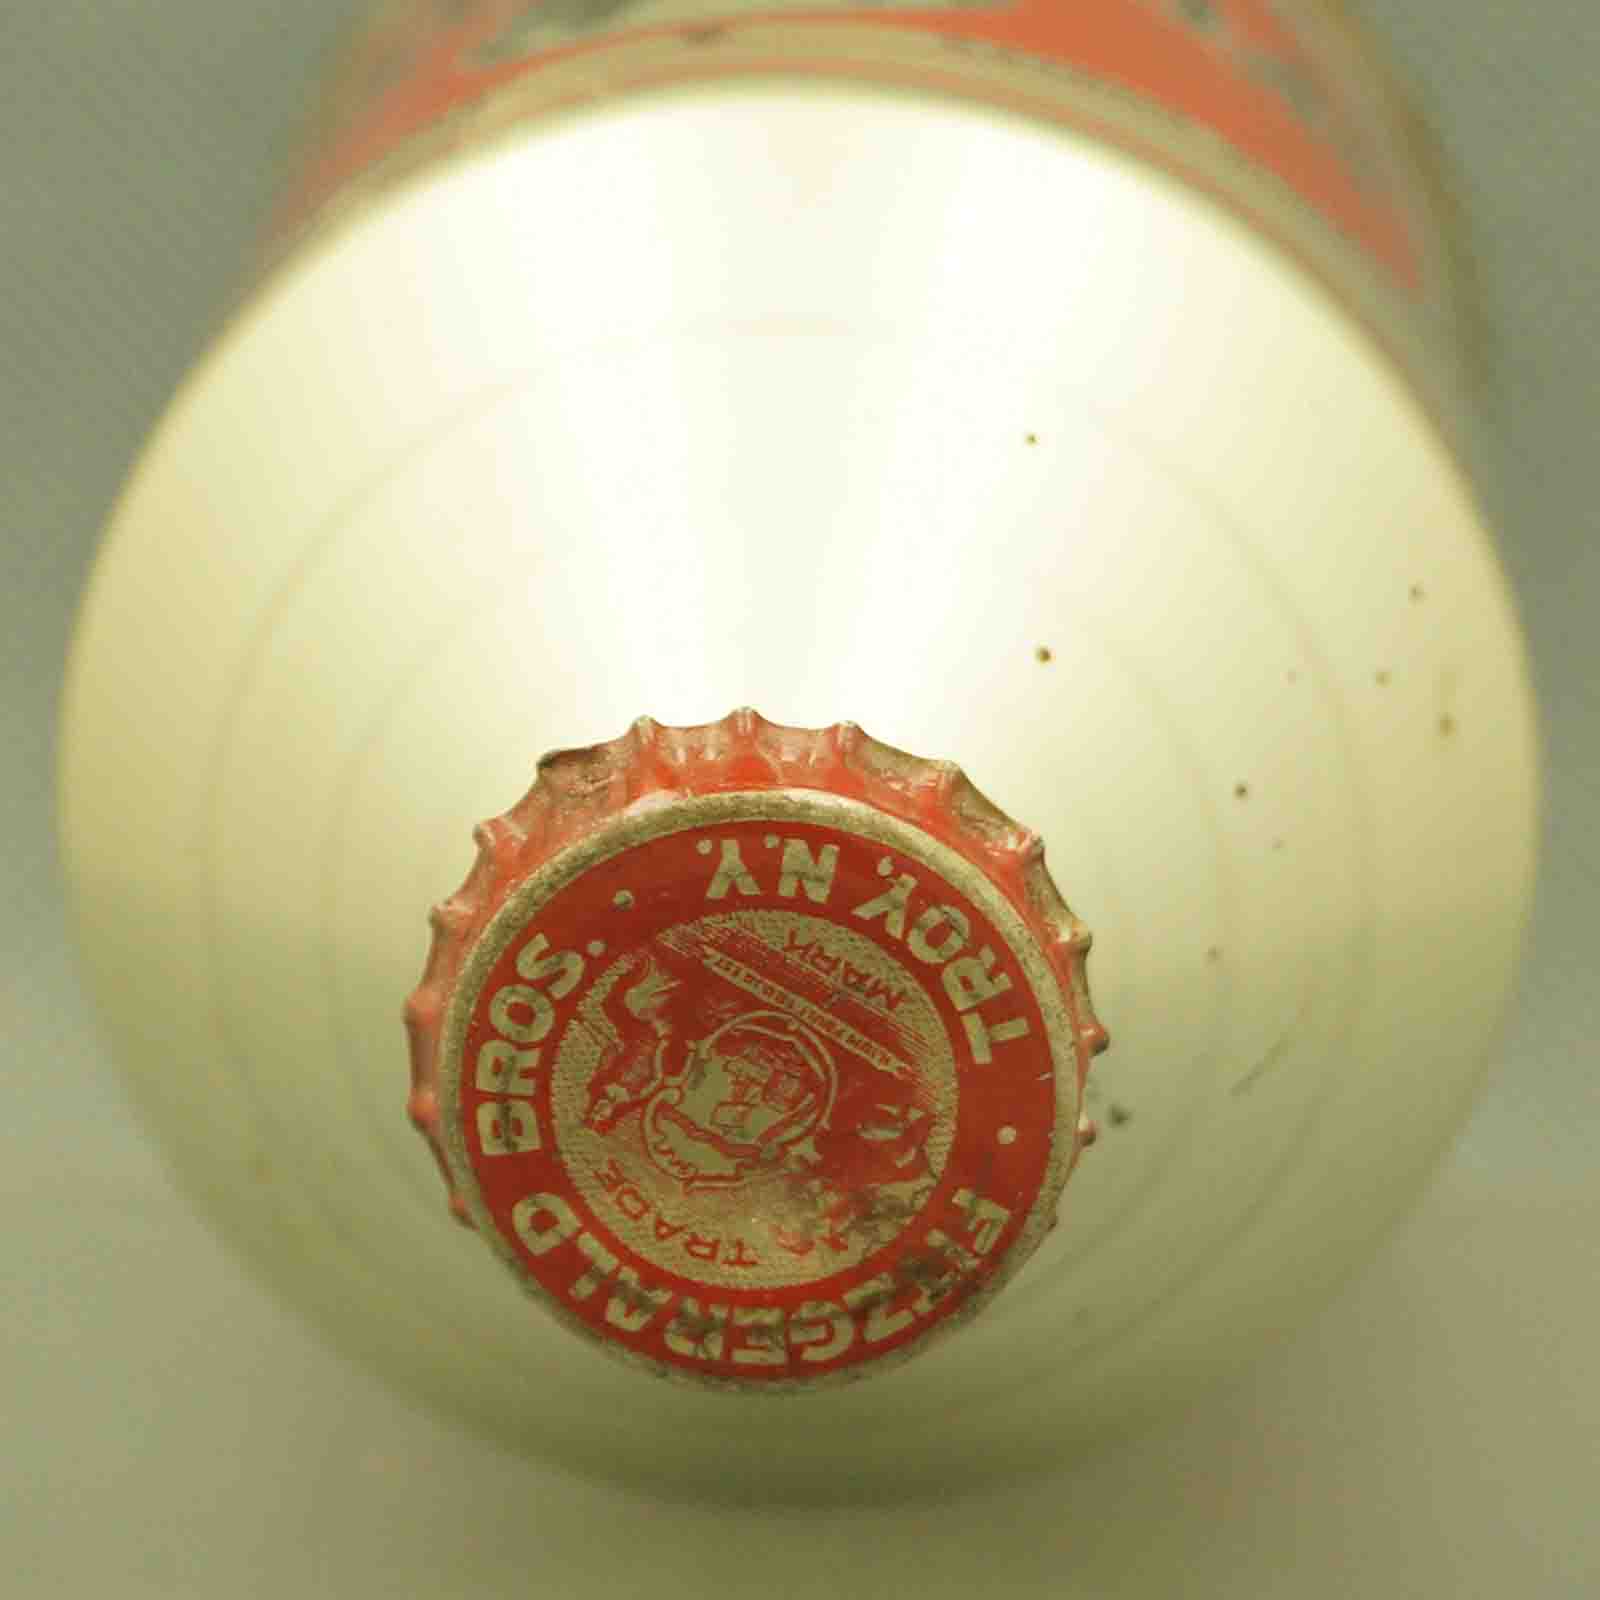 fitzgeralds 193-31 cone top beer can 5